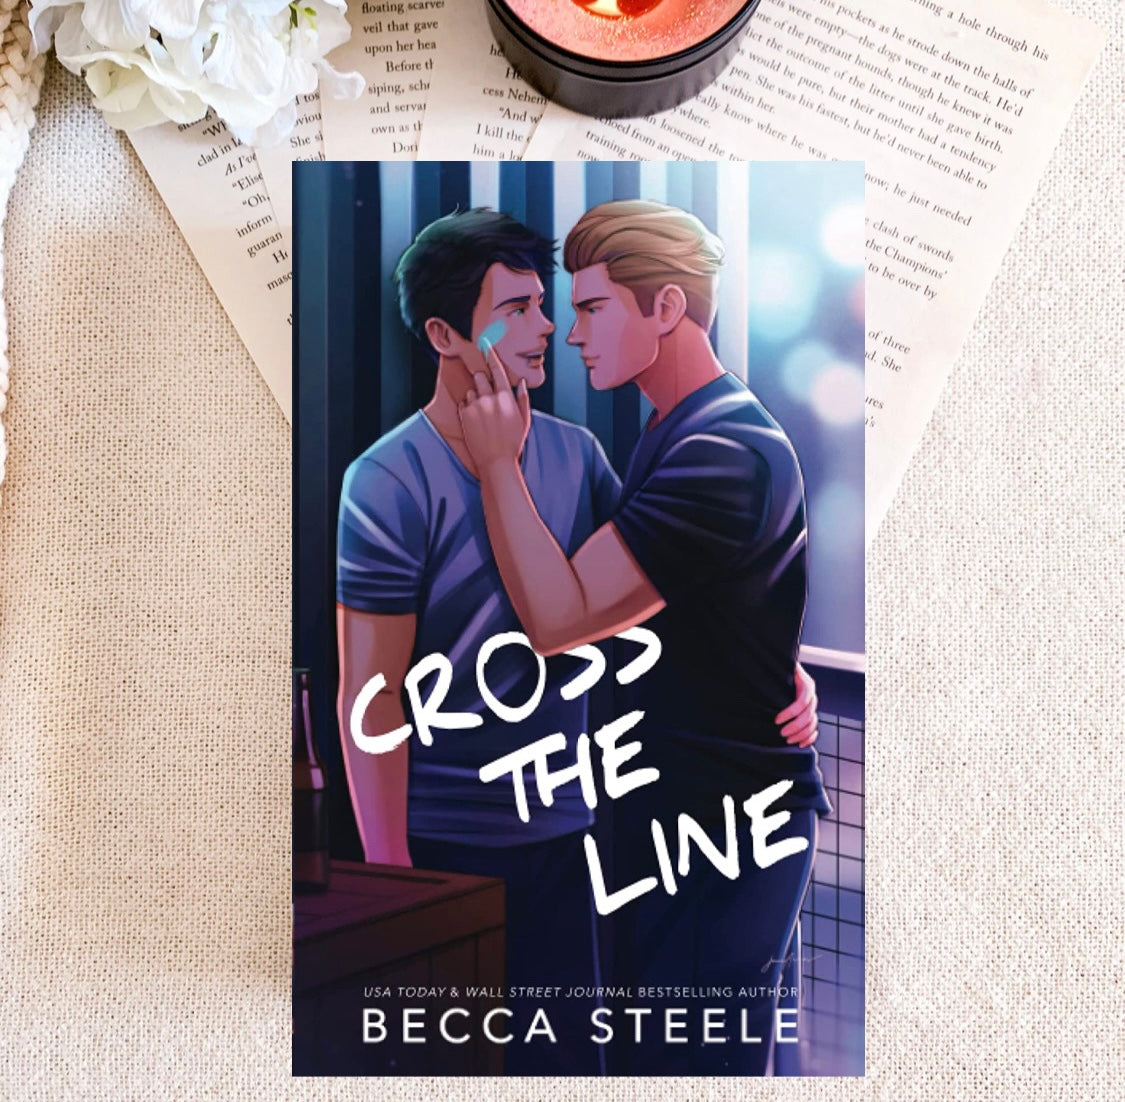 Cross the Line (Special Edition) by Becca Steele